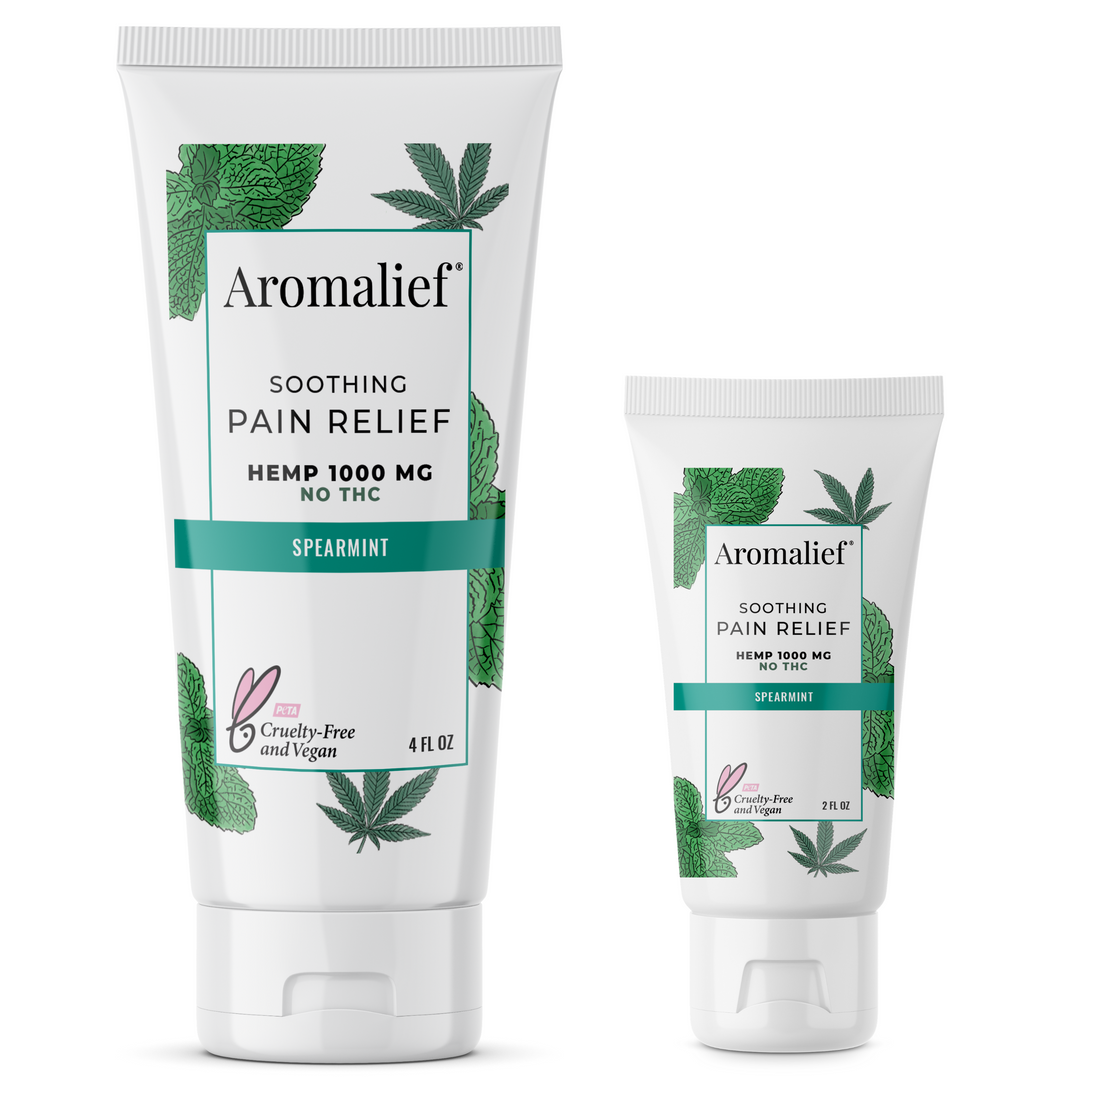 Aromalief Pain Relief Cream - Soothing Spearmint - Full Size and Travel Size Bundle